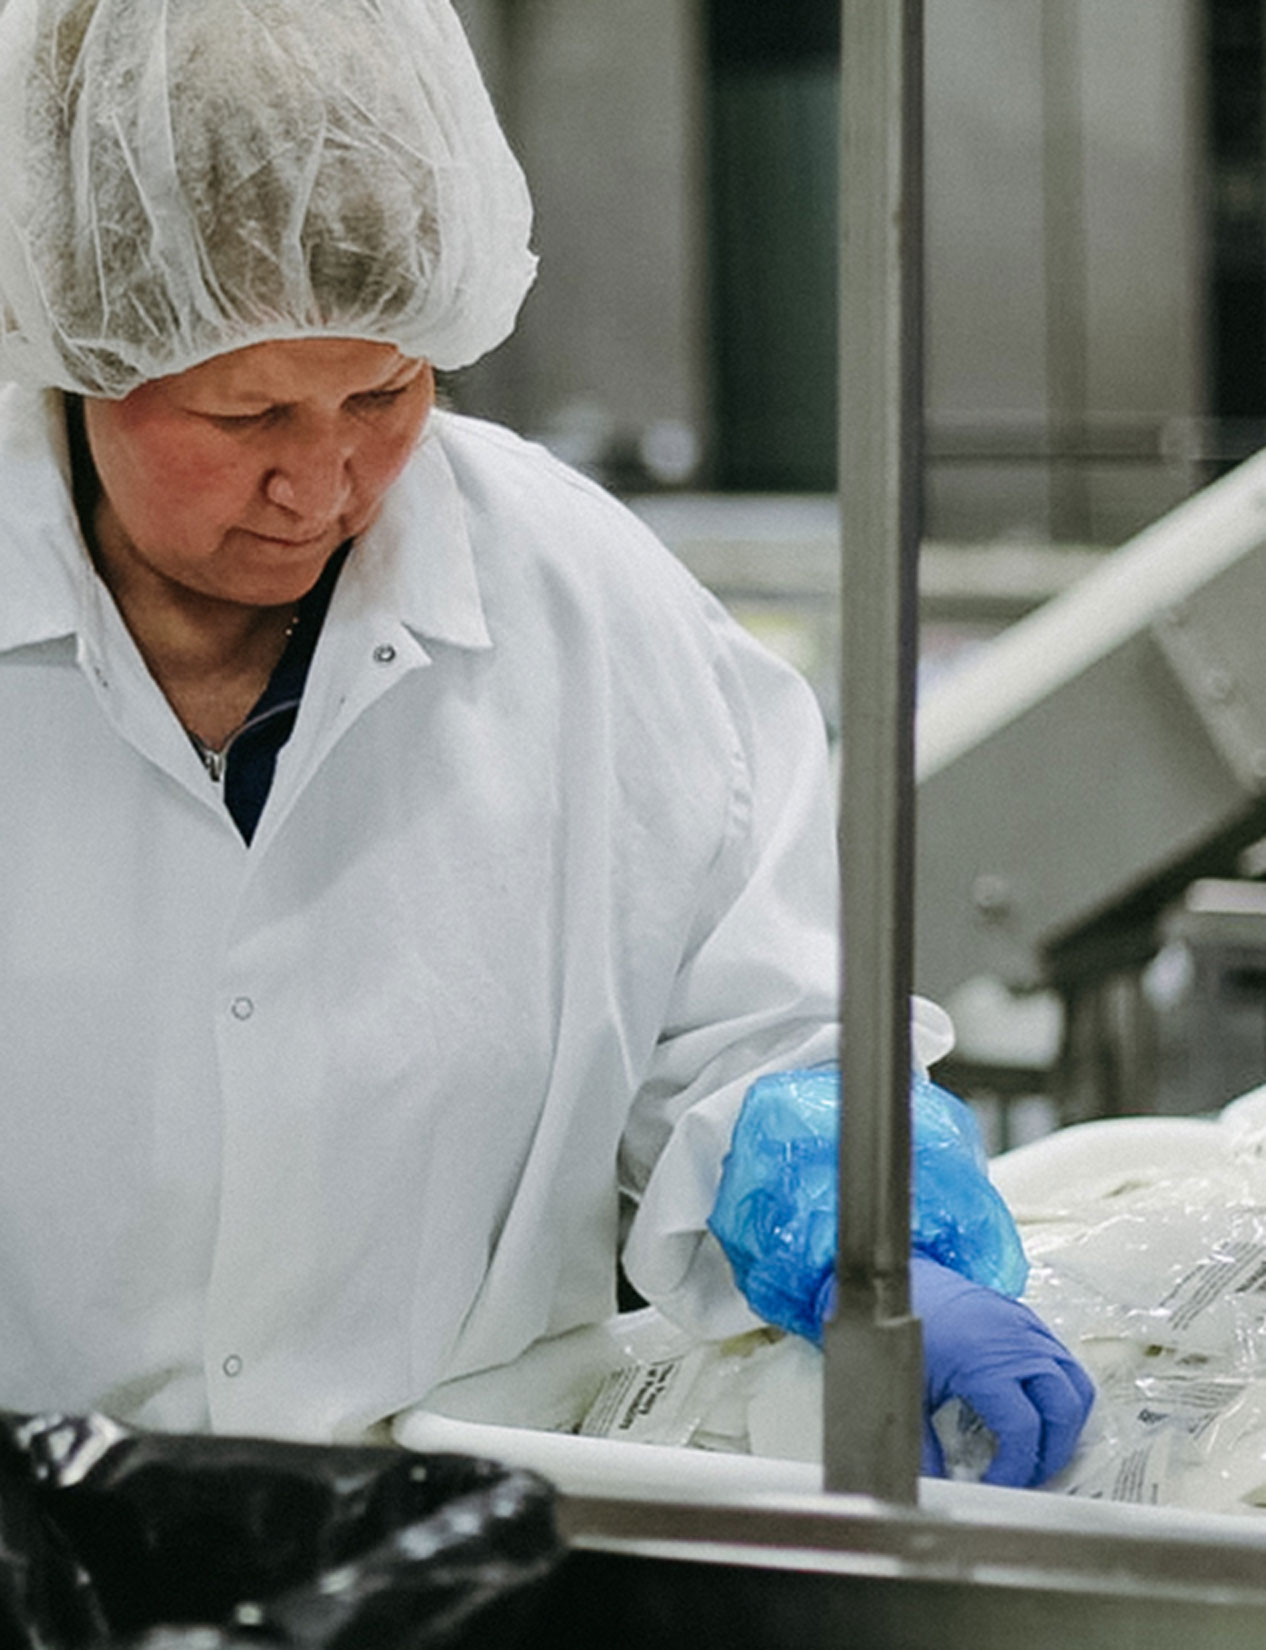 Production employee placing icing packets on conveyer